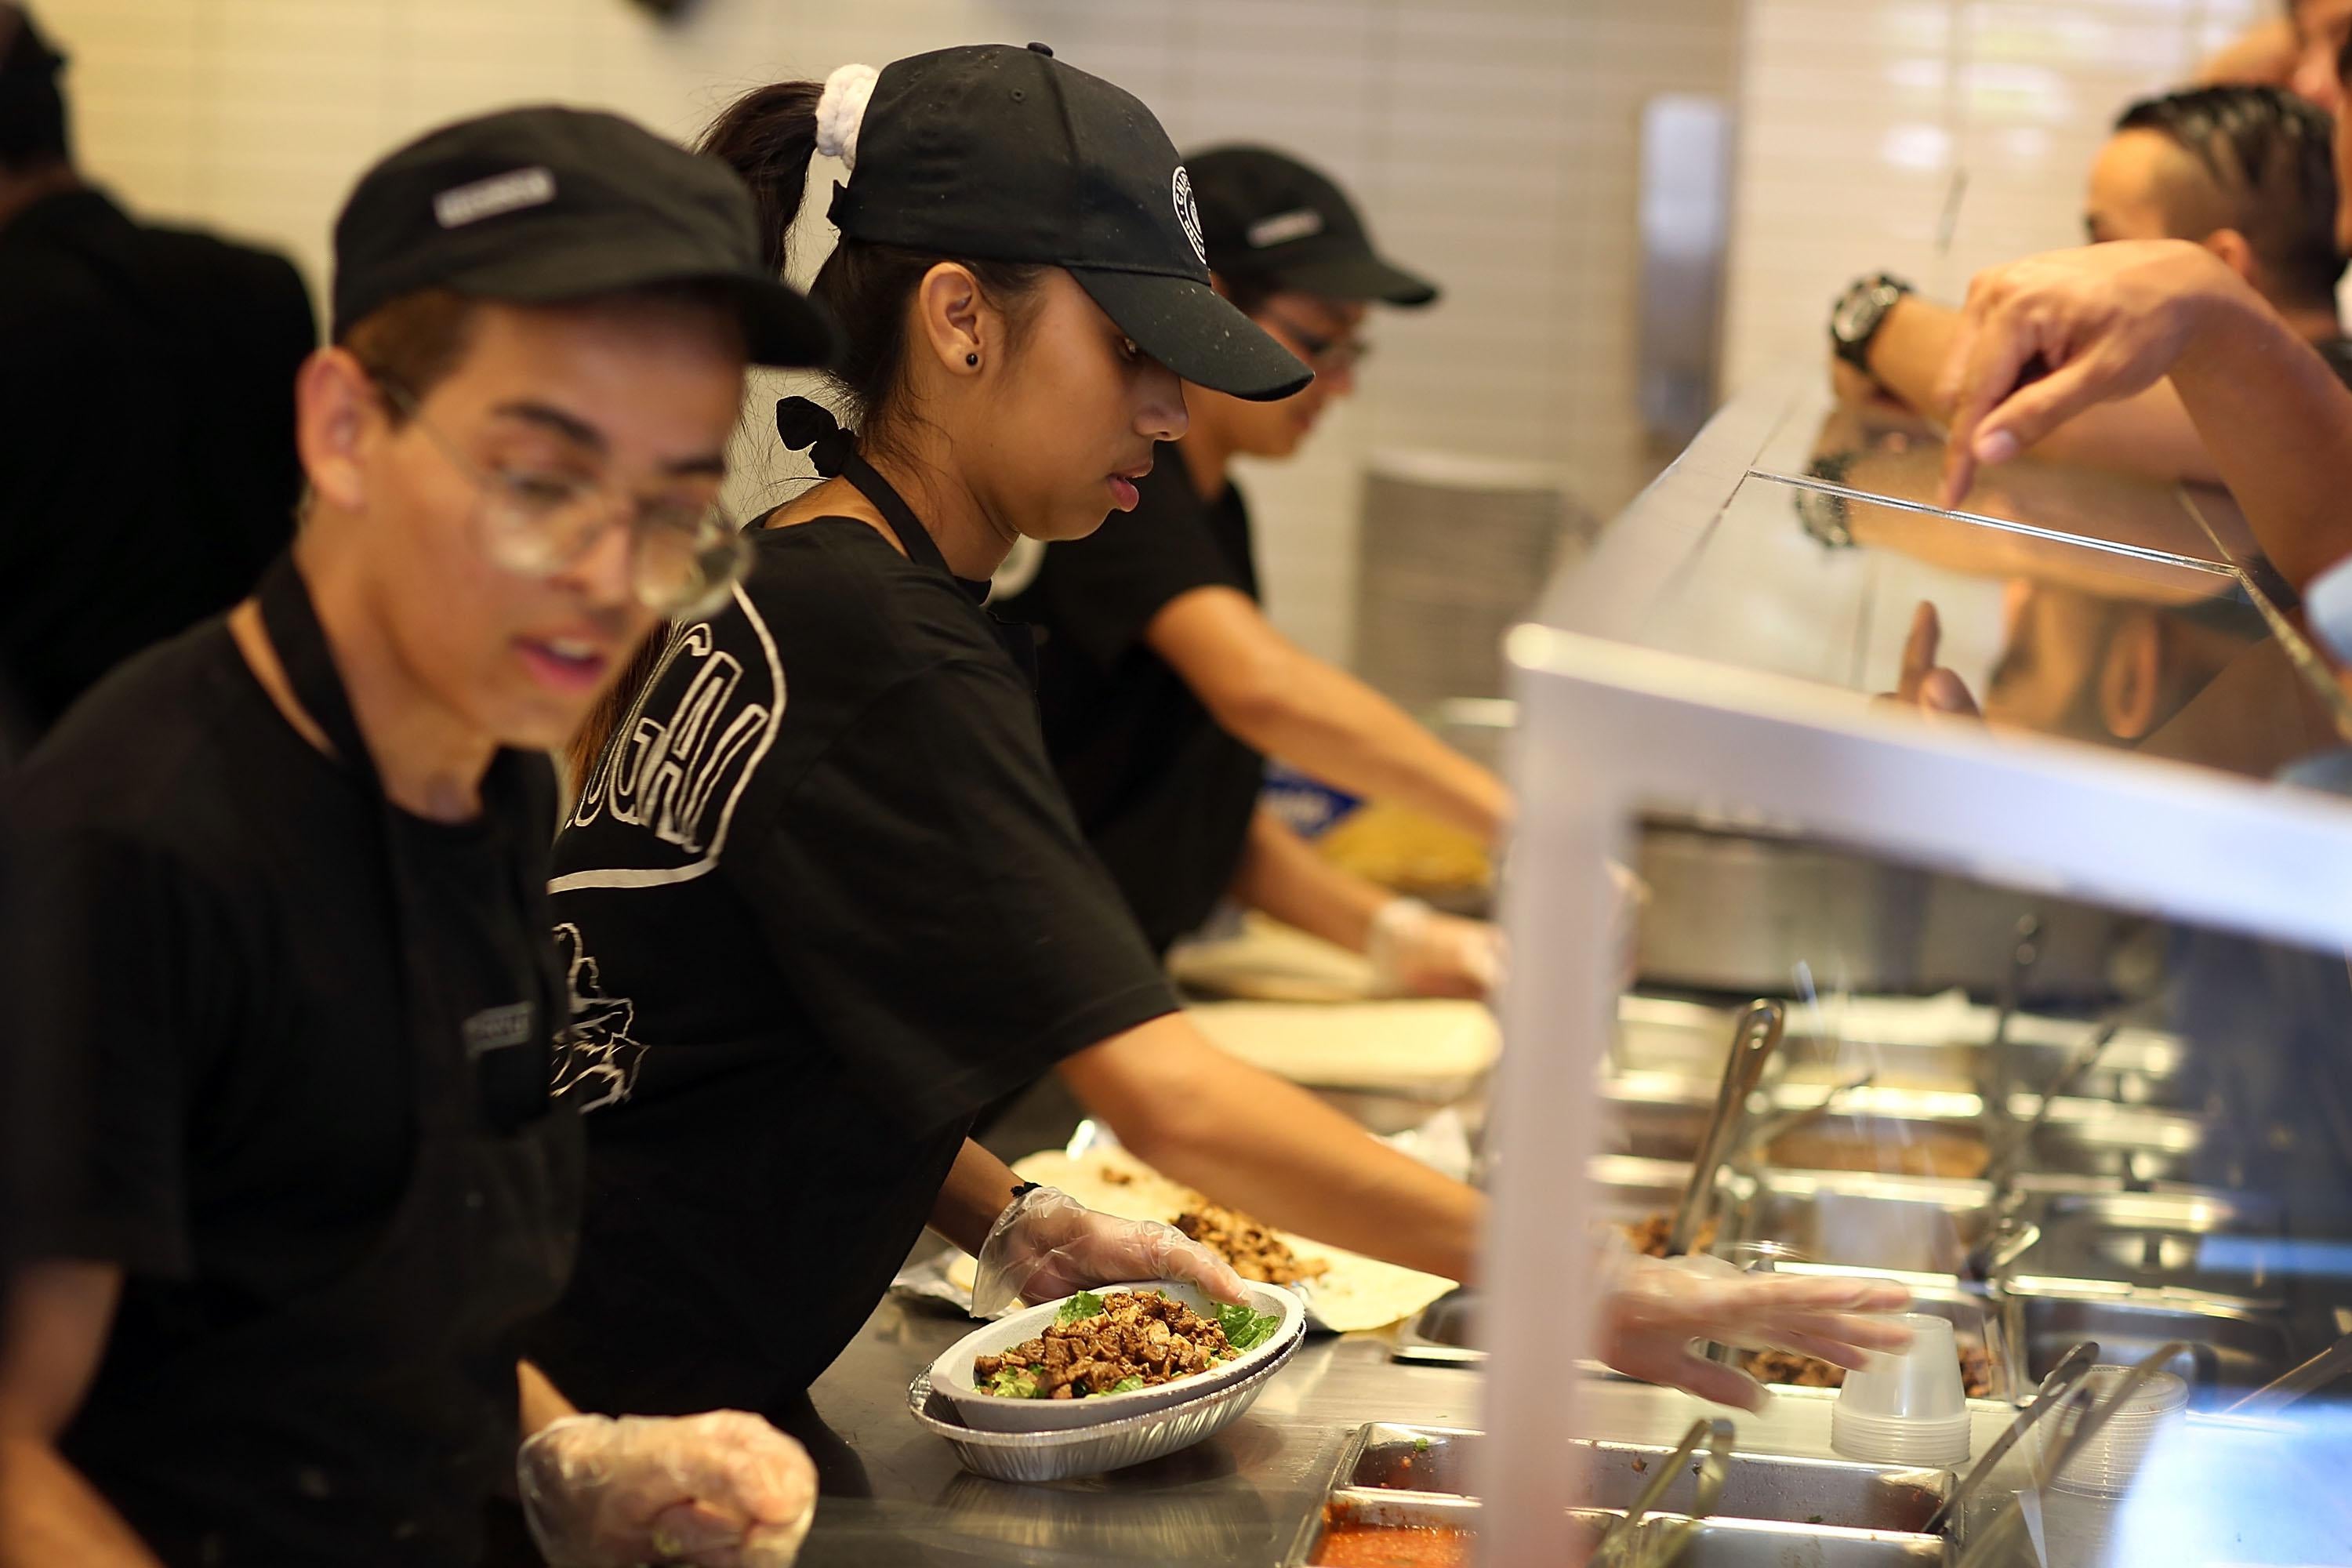 Chipotle restaurant workers fill orders for customers in 2015 in Miami.